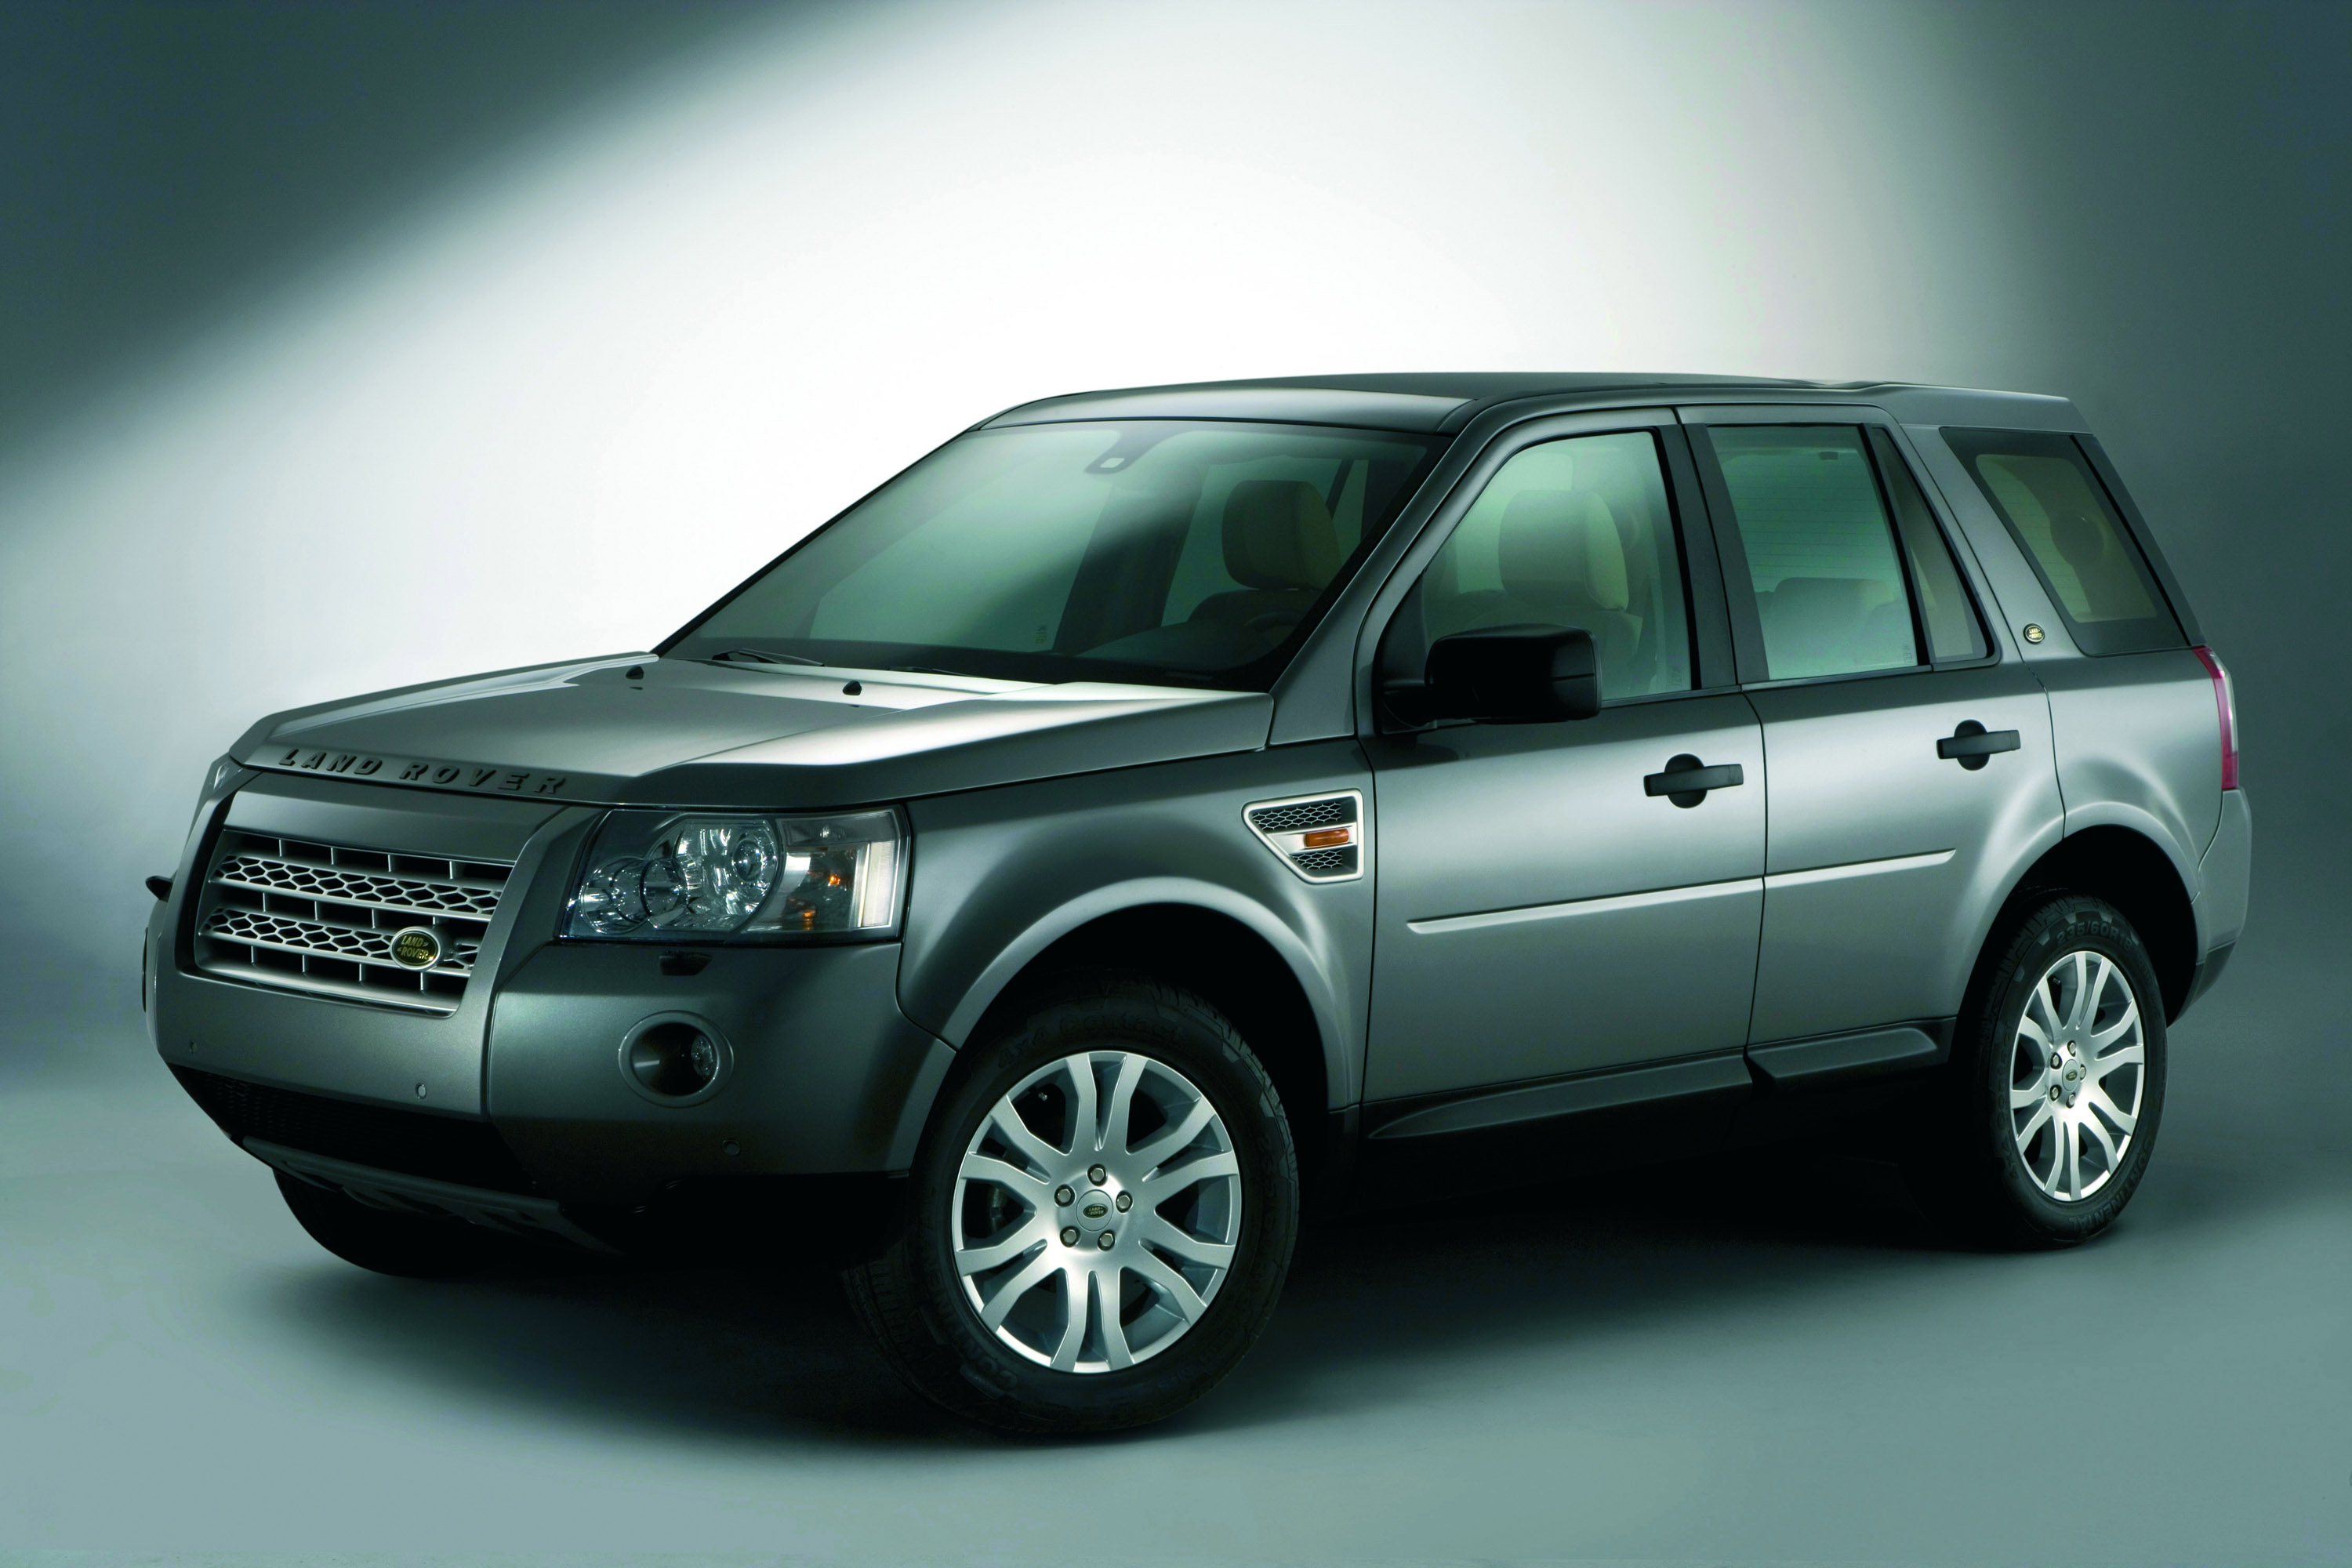 2007 Land Rover Freelander 2 HD Pictures